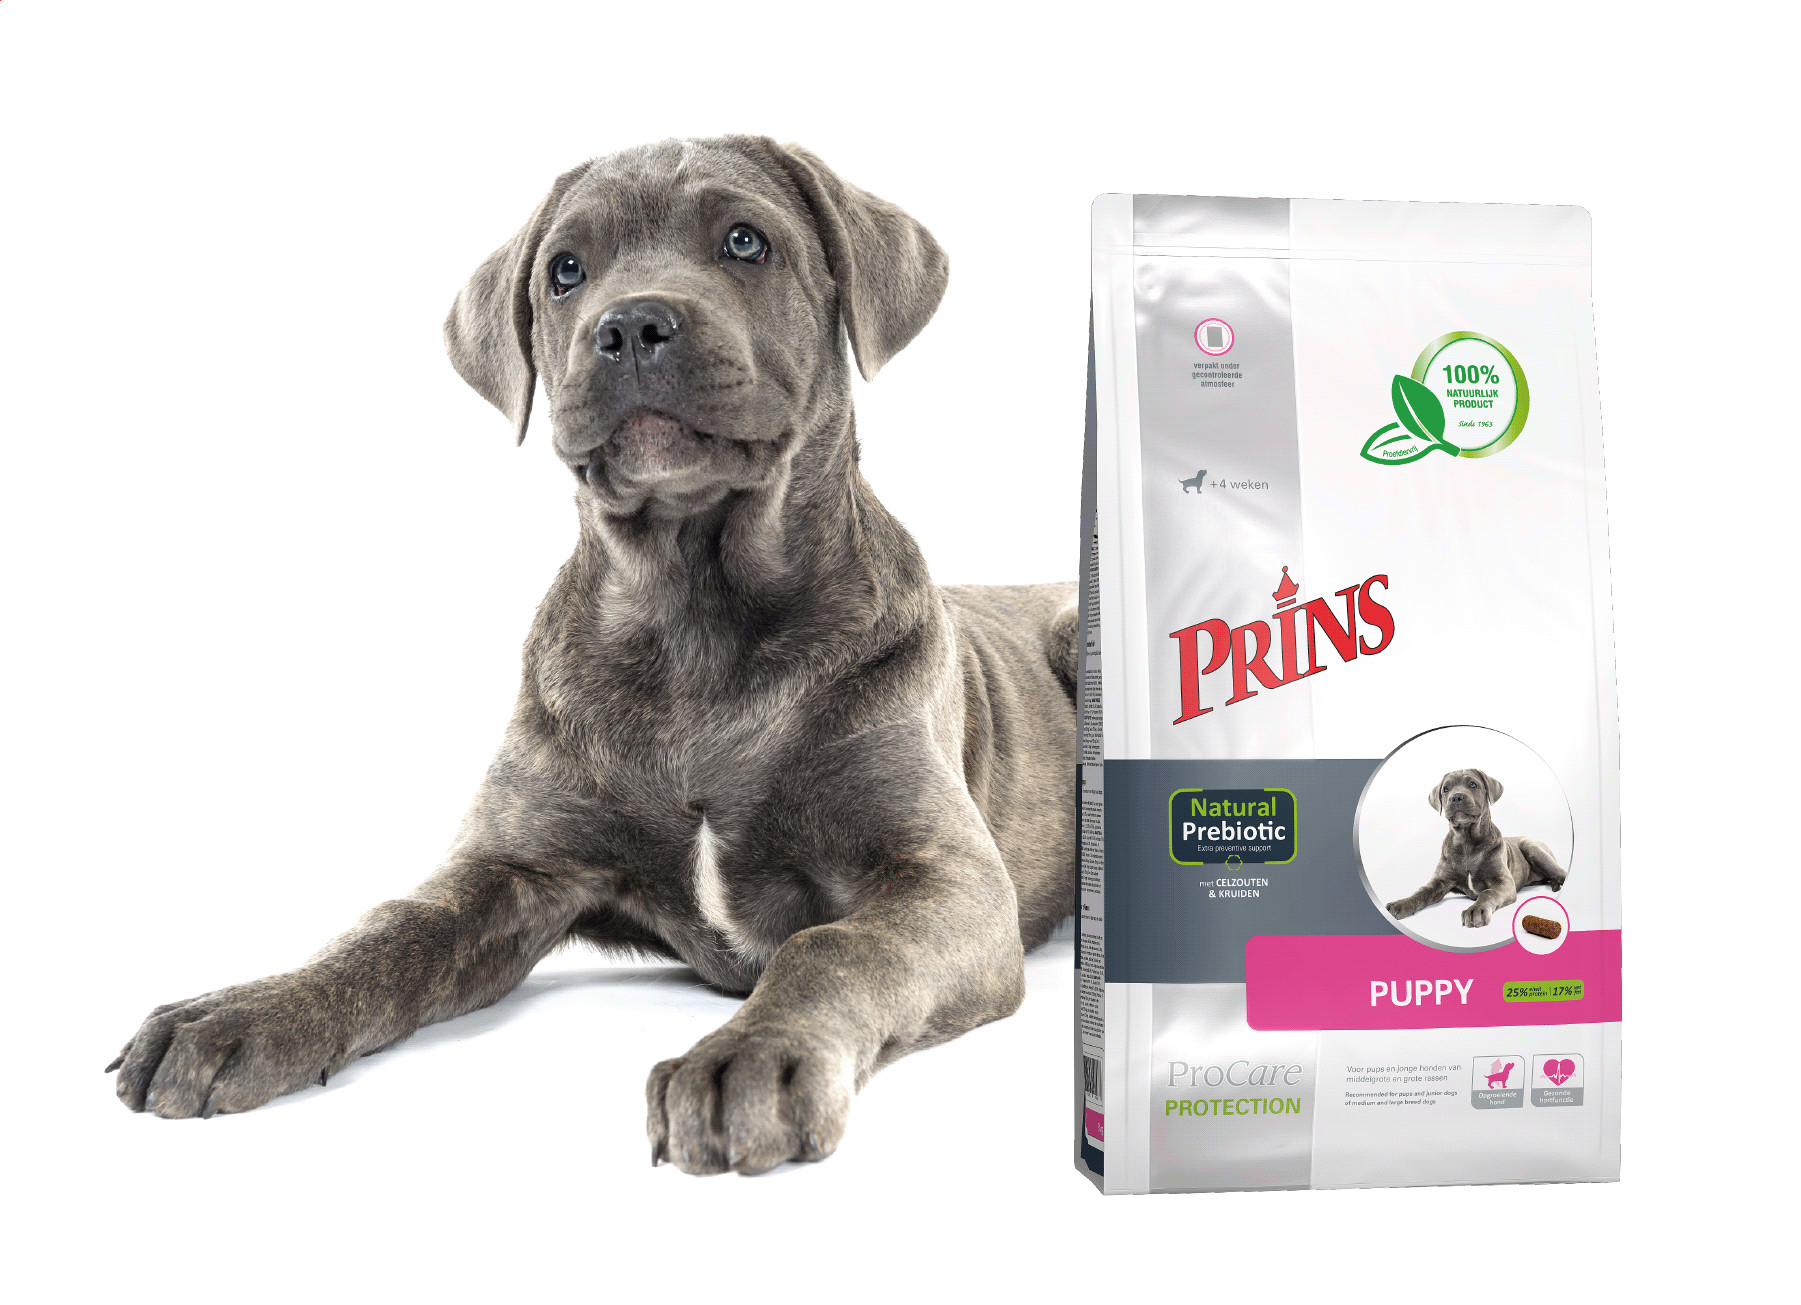 Prins ProCare Protection Puppy Hundefutter